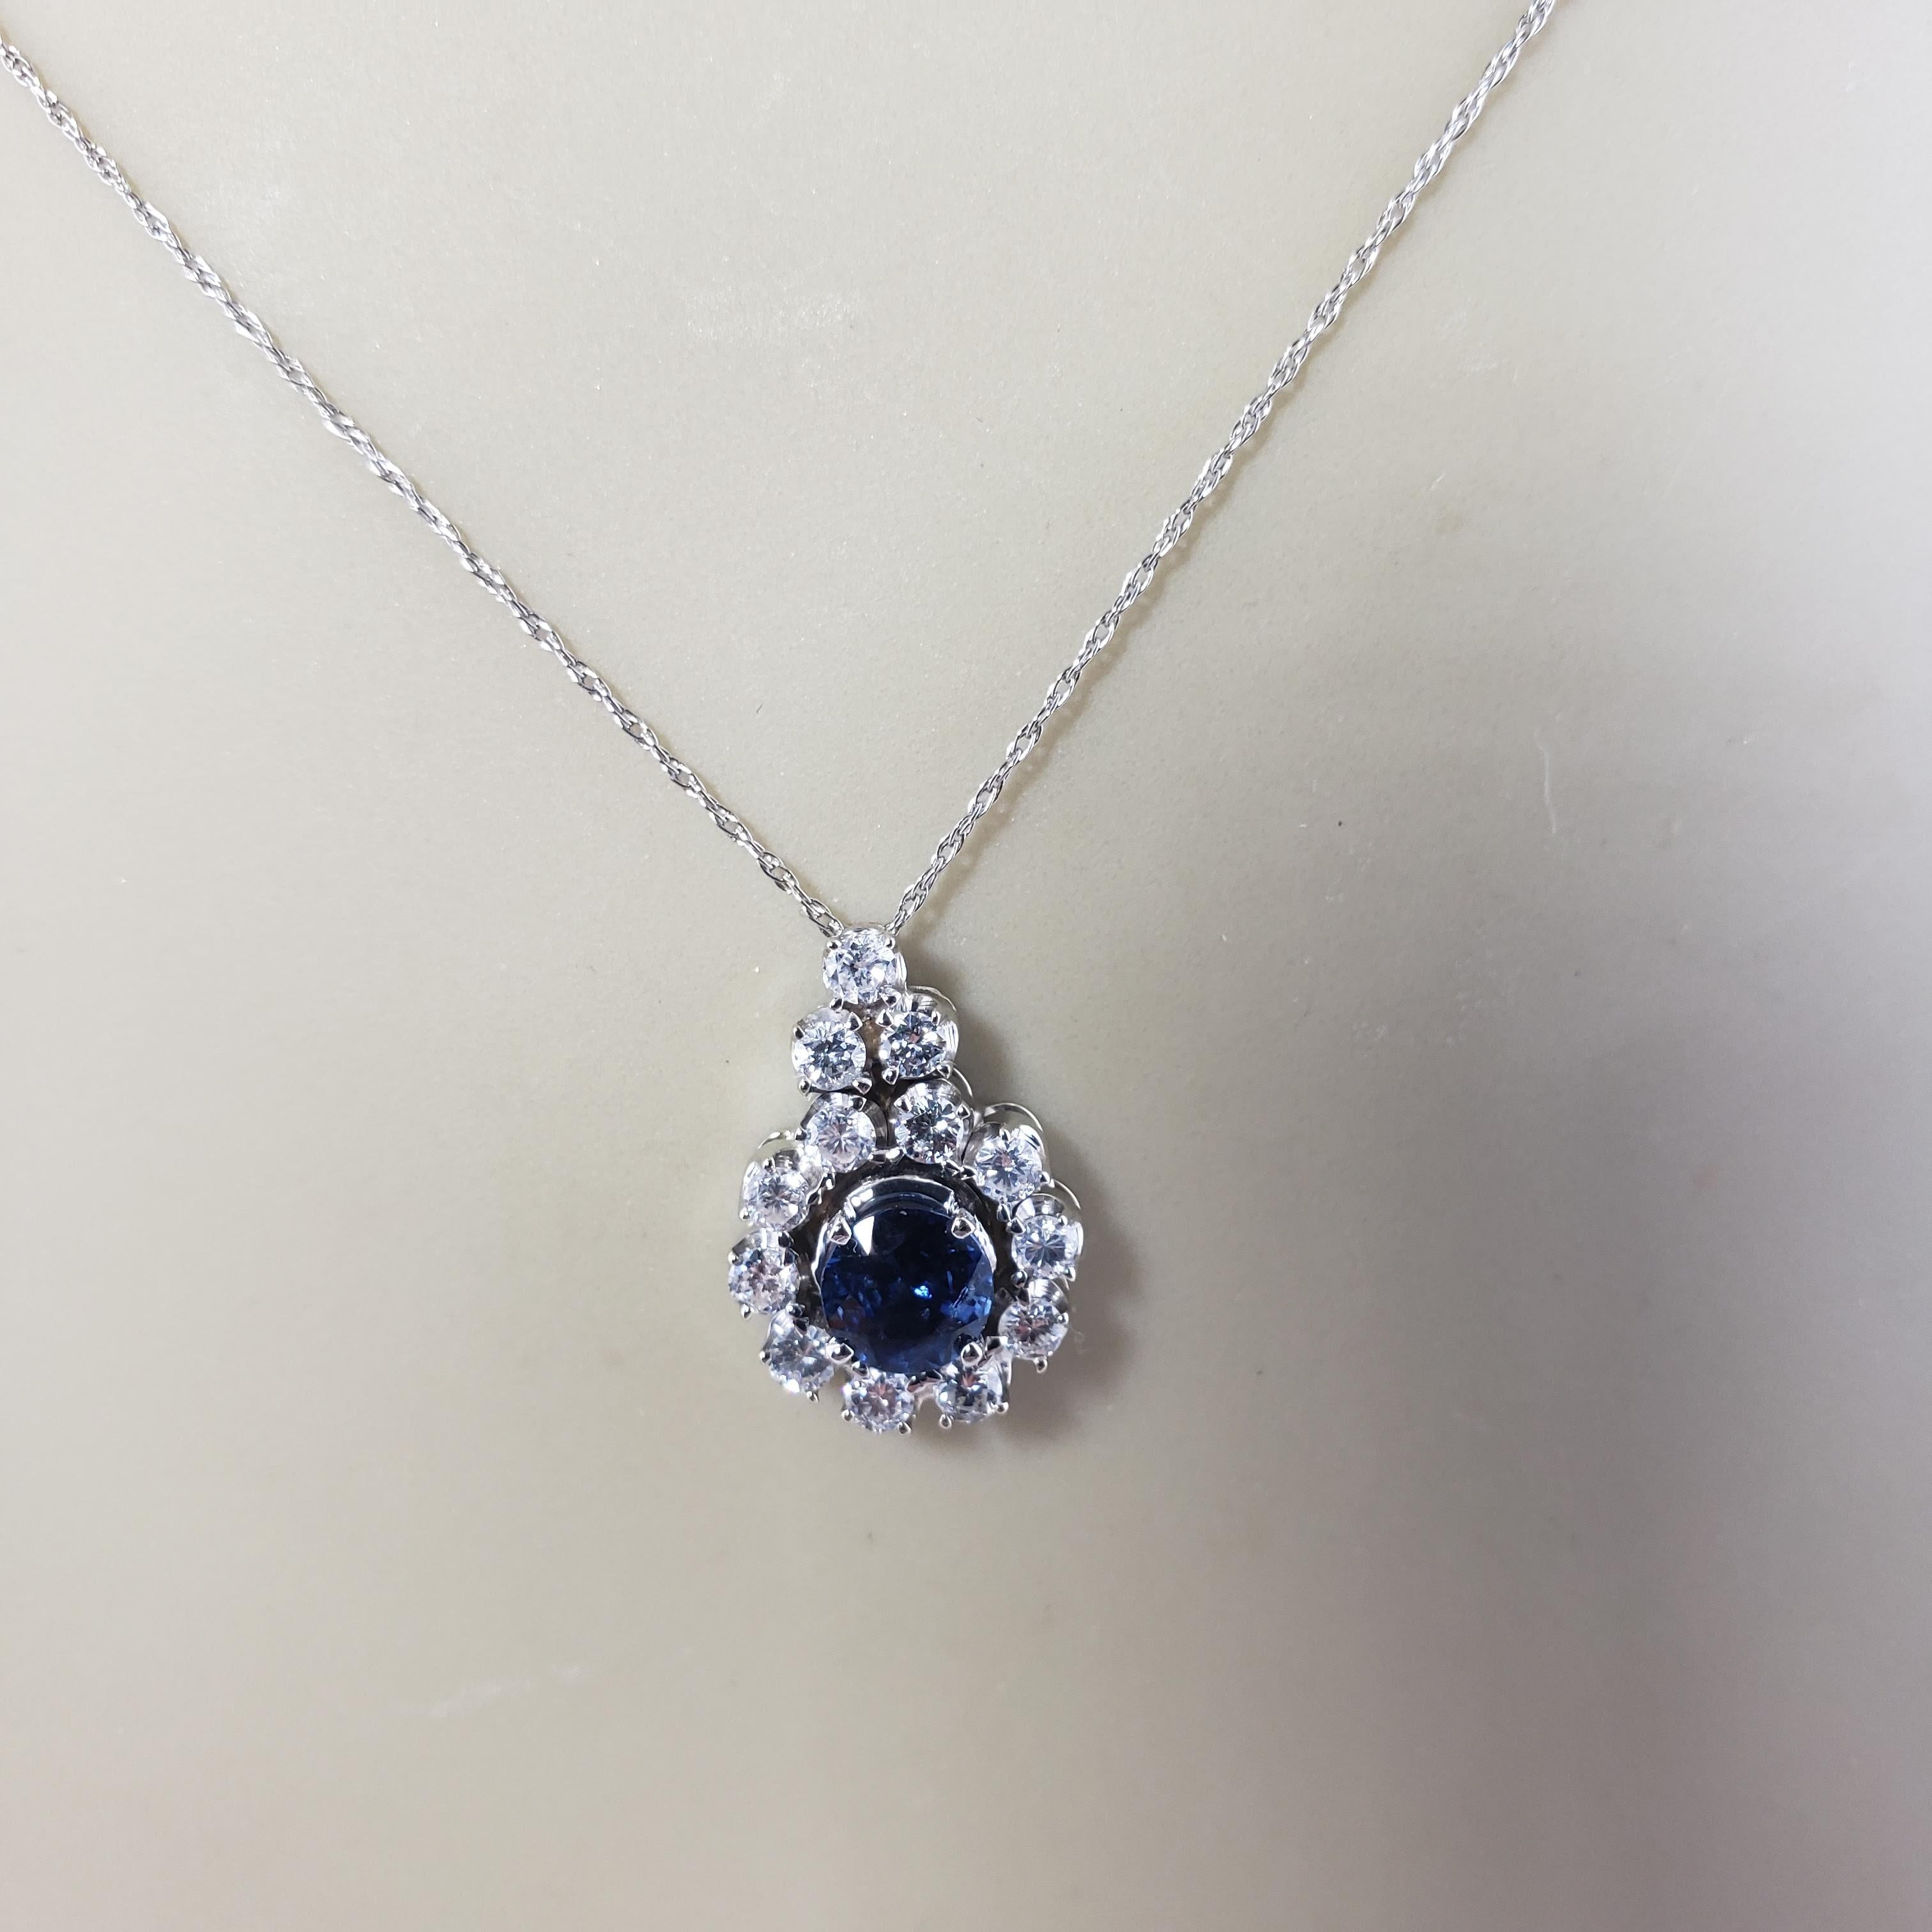 Vintage 14 Karat White Gold Sapphire and Diamond Pendant Necklace-

This lovely pendant features one round sapphire (5 mm) surrounded by 13 round brilliant cut diamonds. Suspends from a classic cable necklace.

Approximate total diamond weight: .52